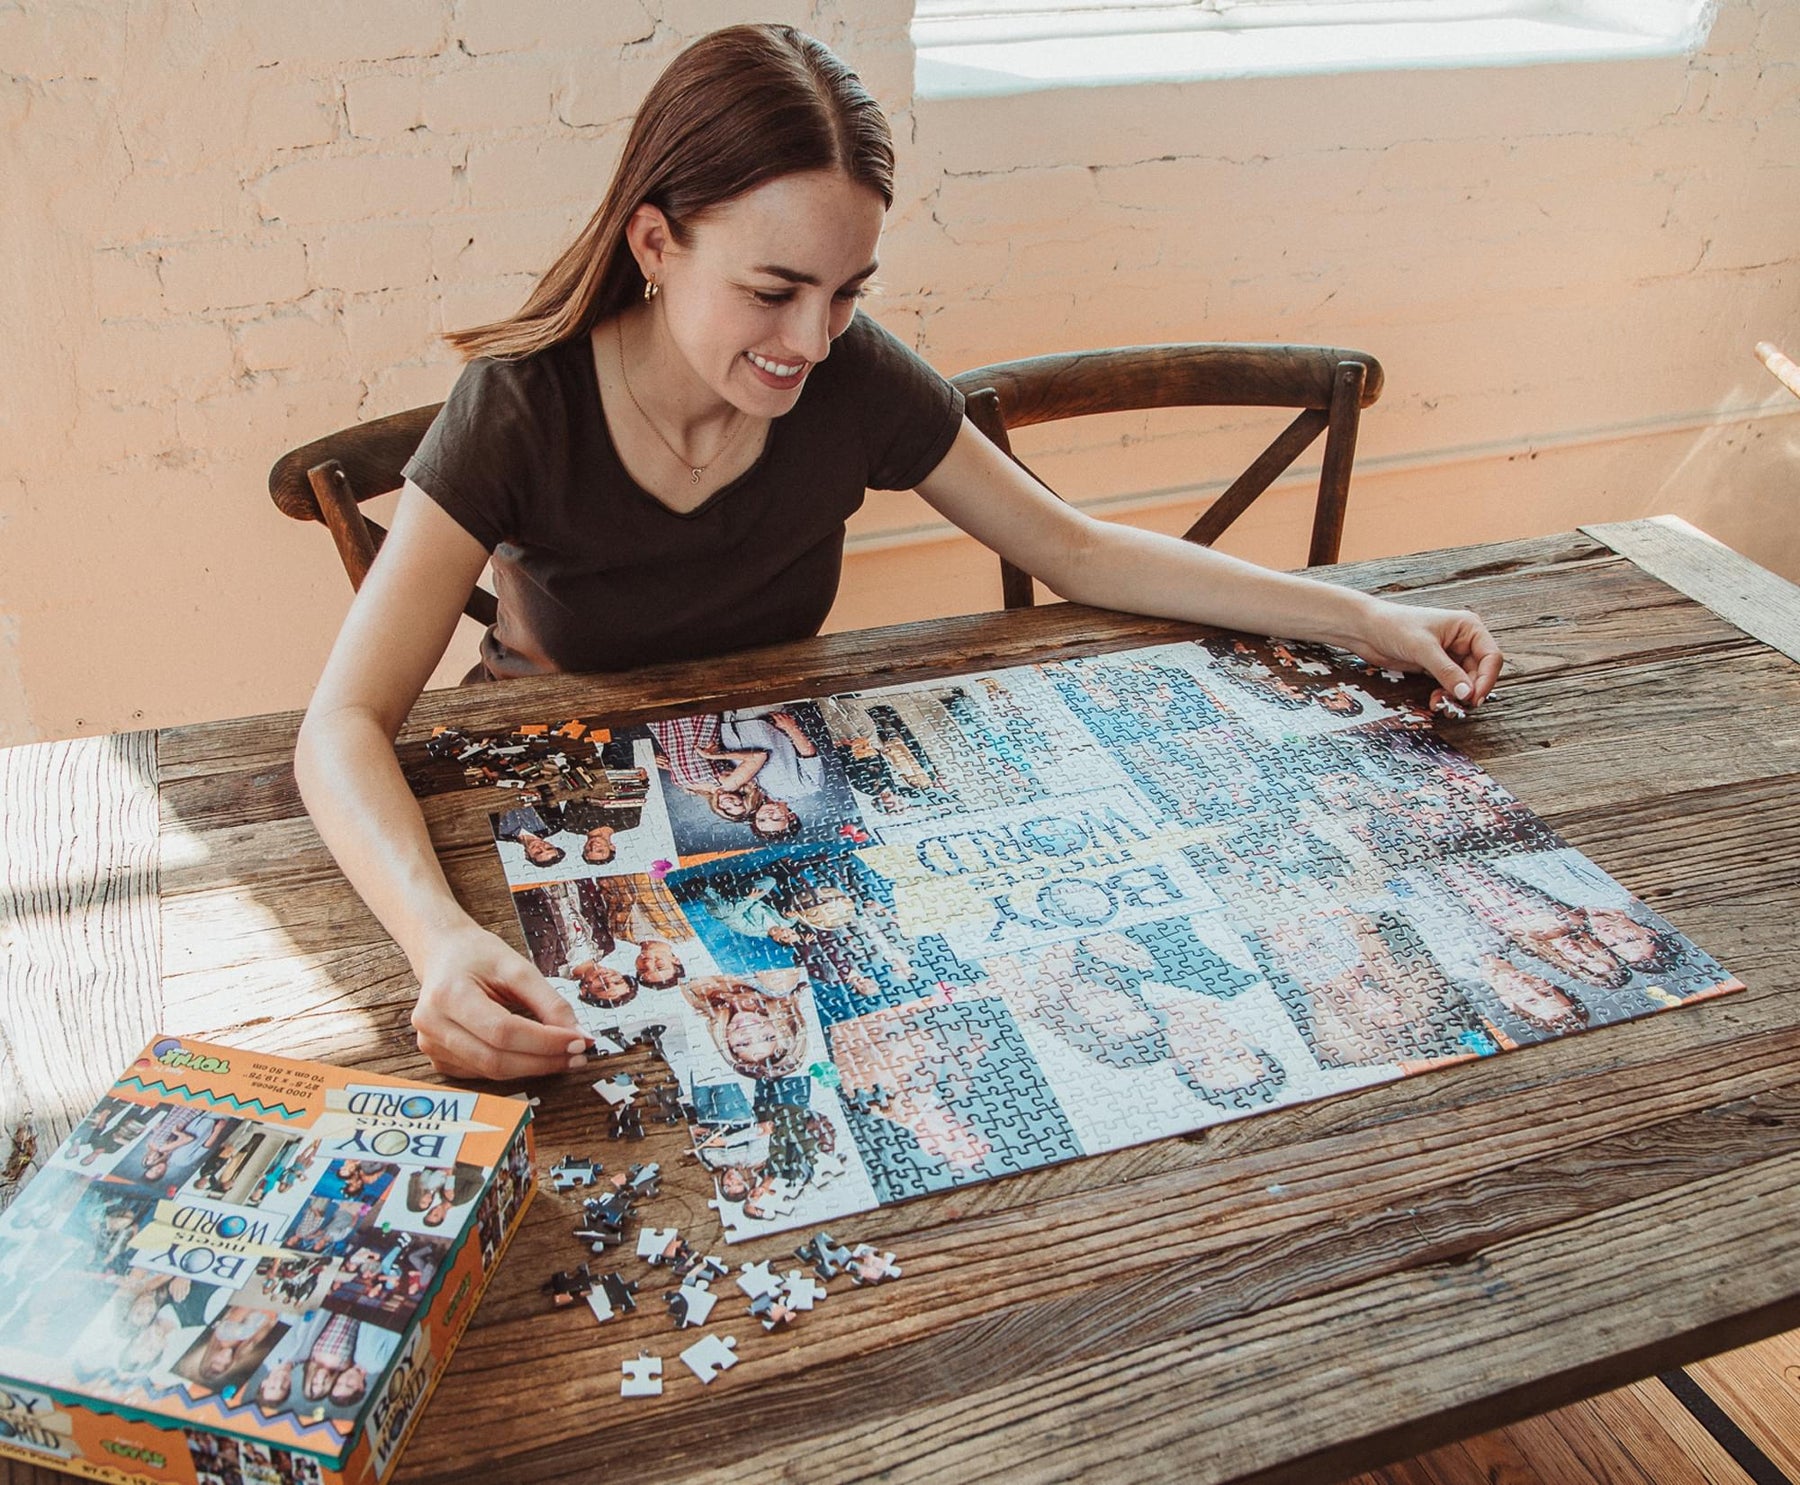 Boy Meets World 1000-Piece Jigsaw Puzzle | Toynk Exclusive